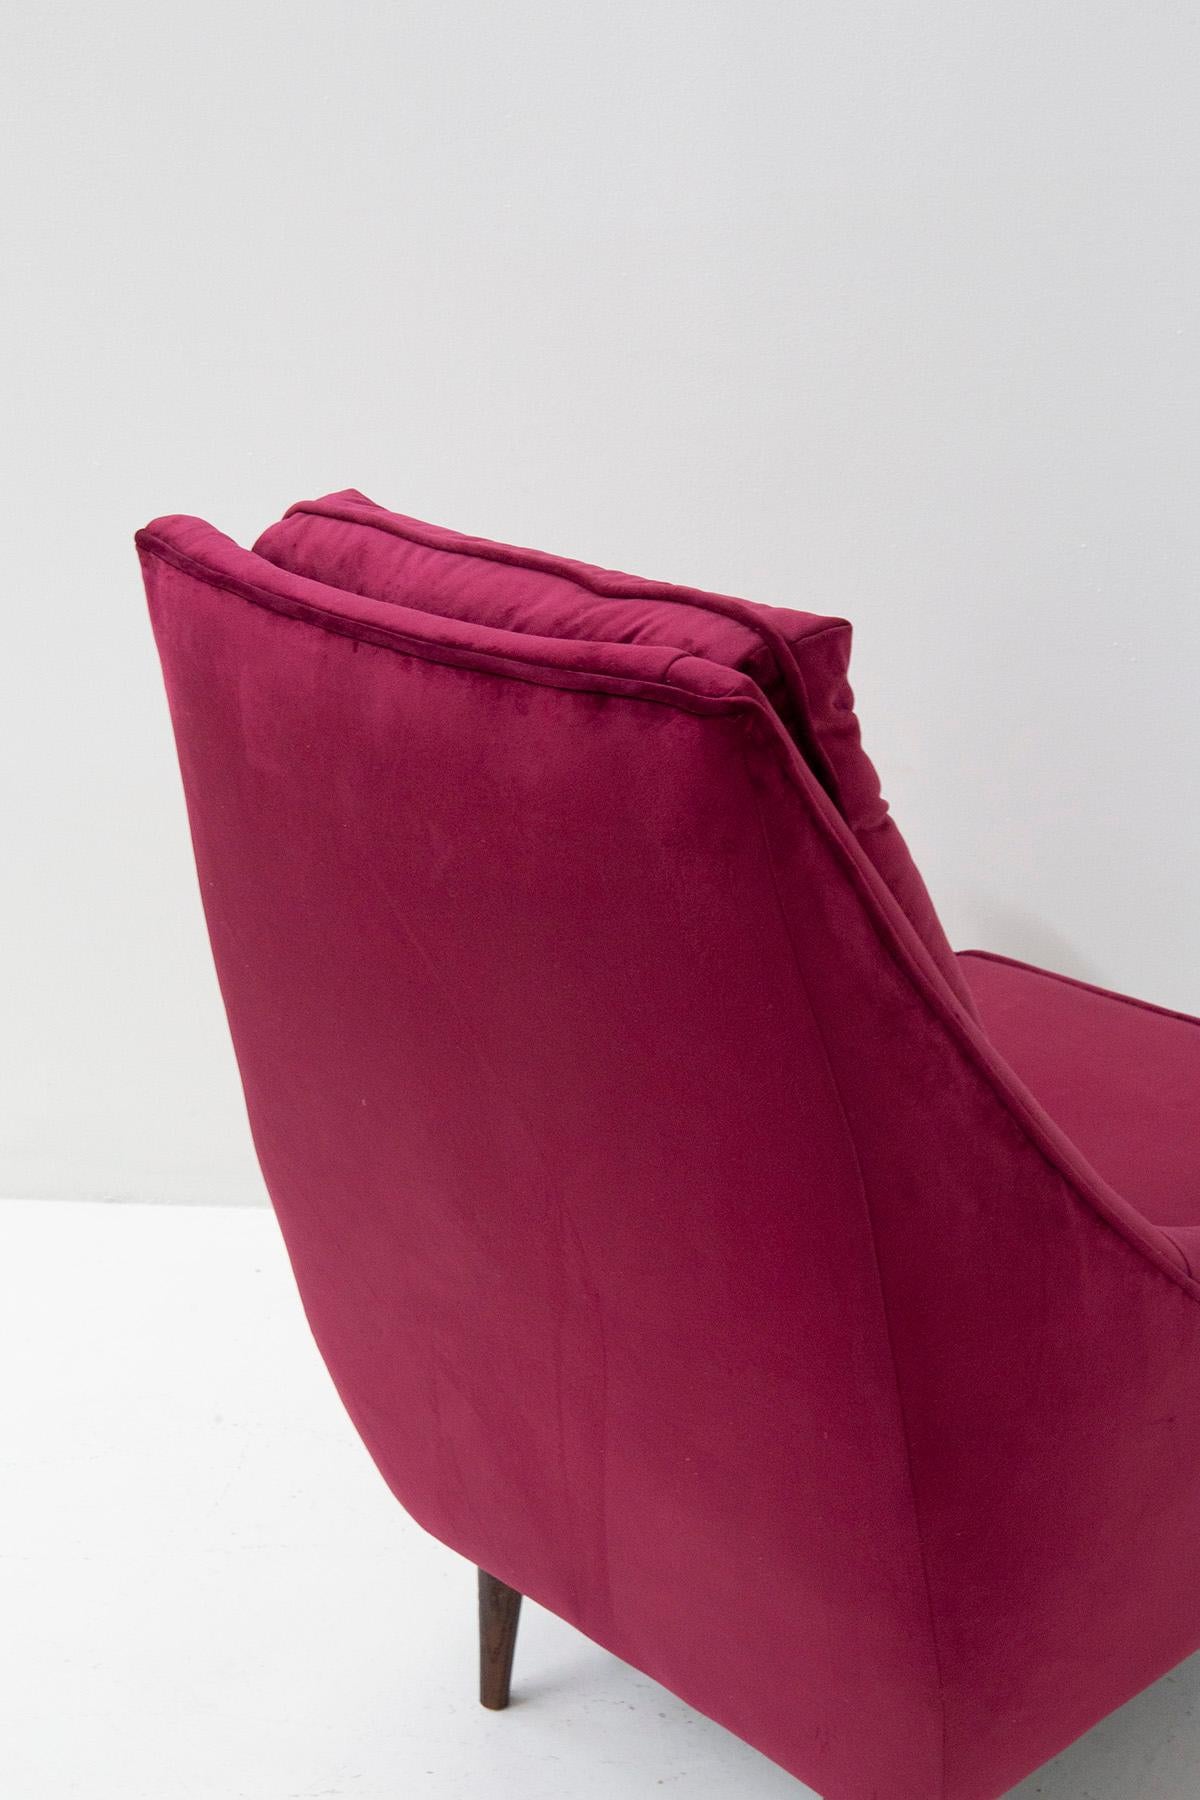 Adrian Pearsall Pair of Purple Armchairs in Velvet Him and Her For Sale 5